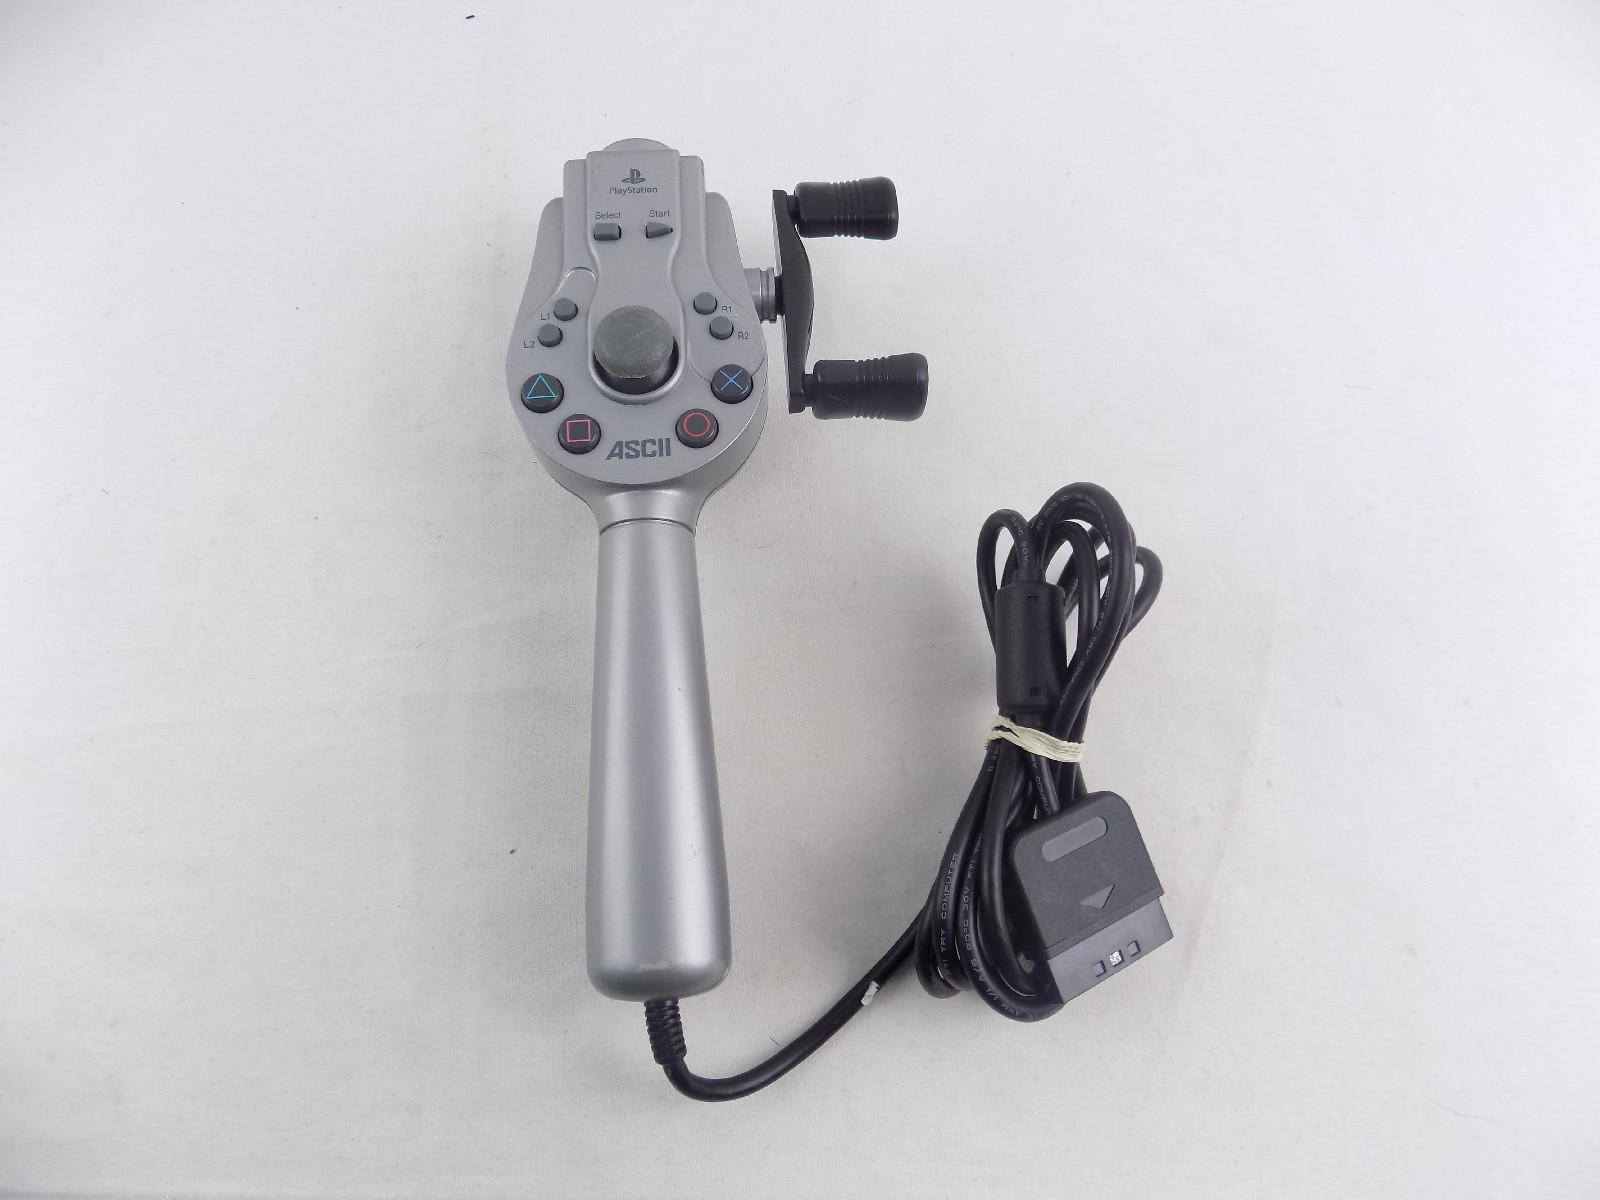 Sony Playstation Bass Landing Video Game With Fishing Controller